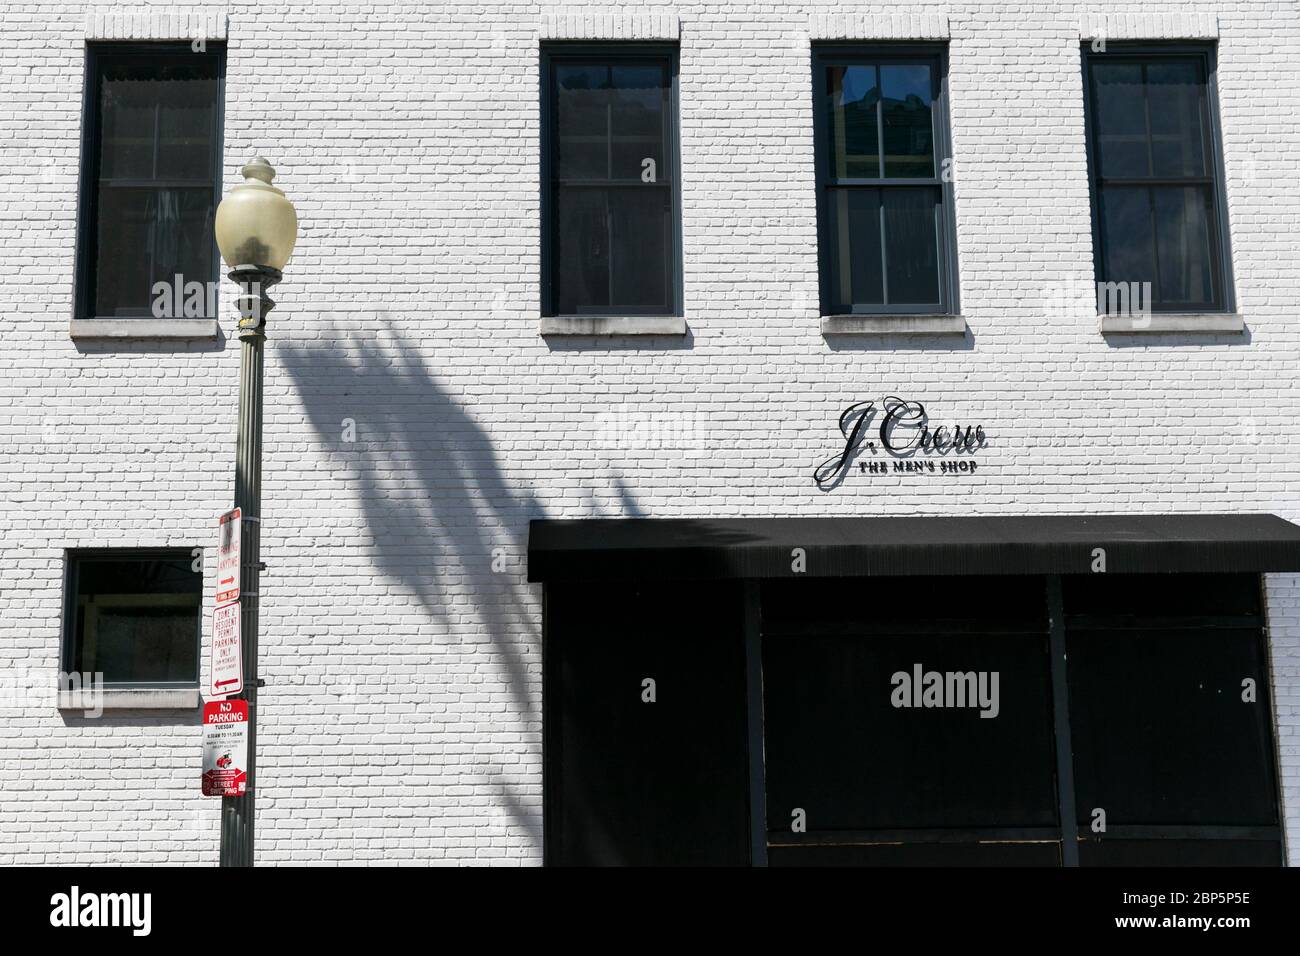 A logo sign outside of a J.Crew The Men's Shop retail store location in Washington, D.C., on May 12, 2020. Stock Photo